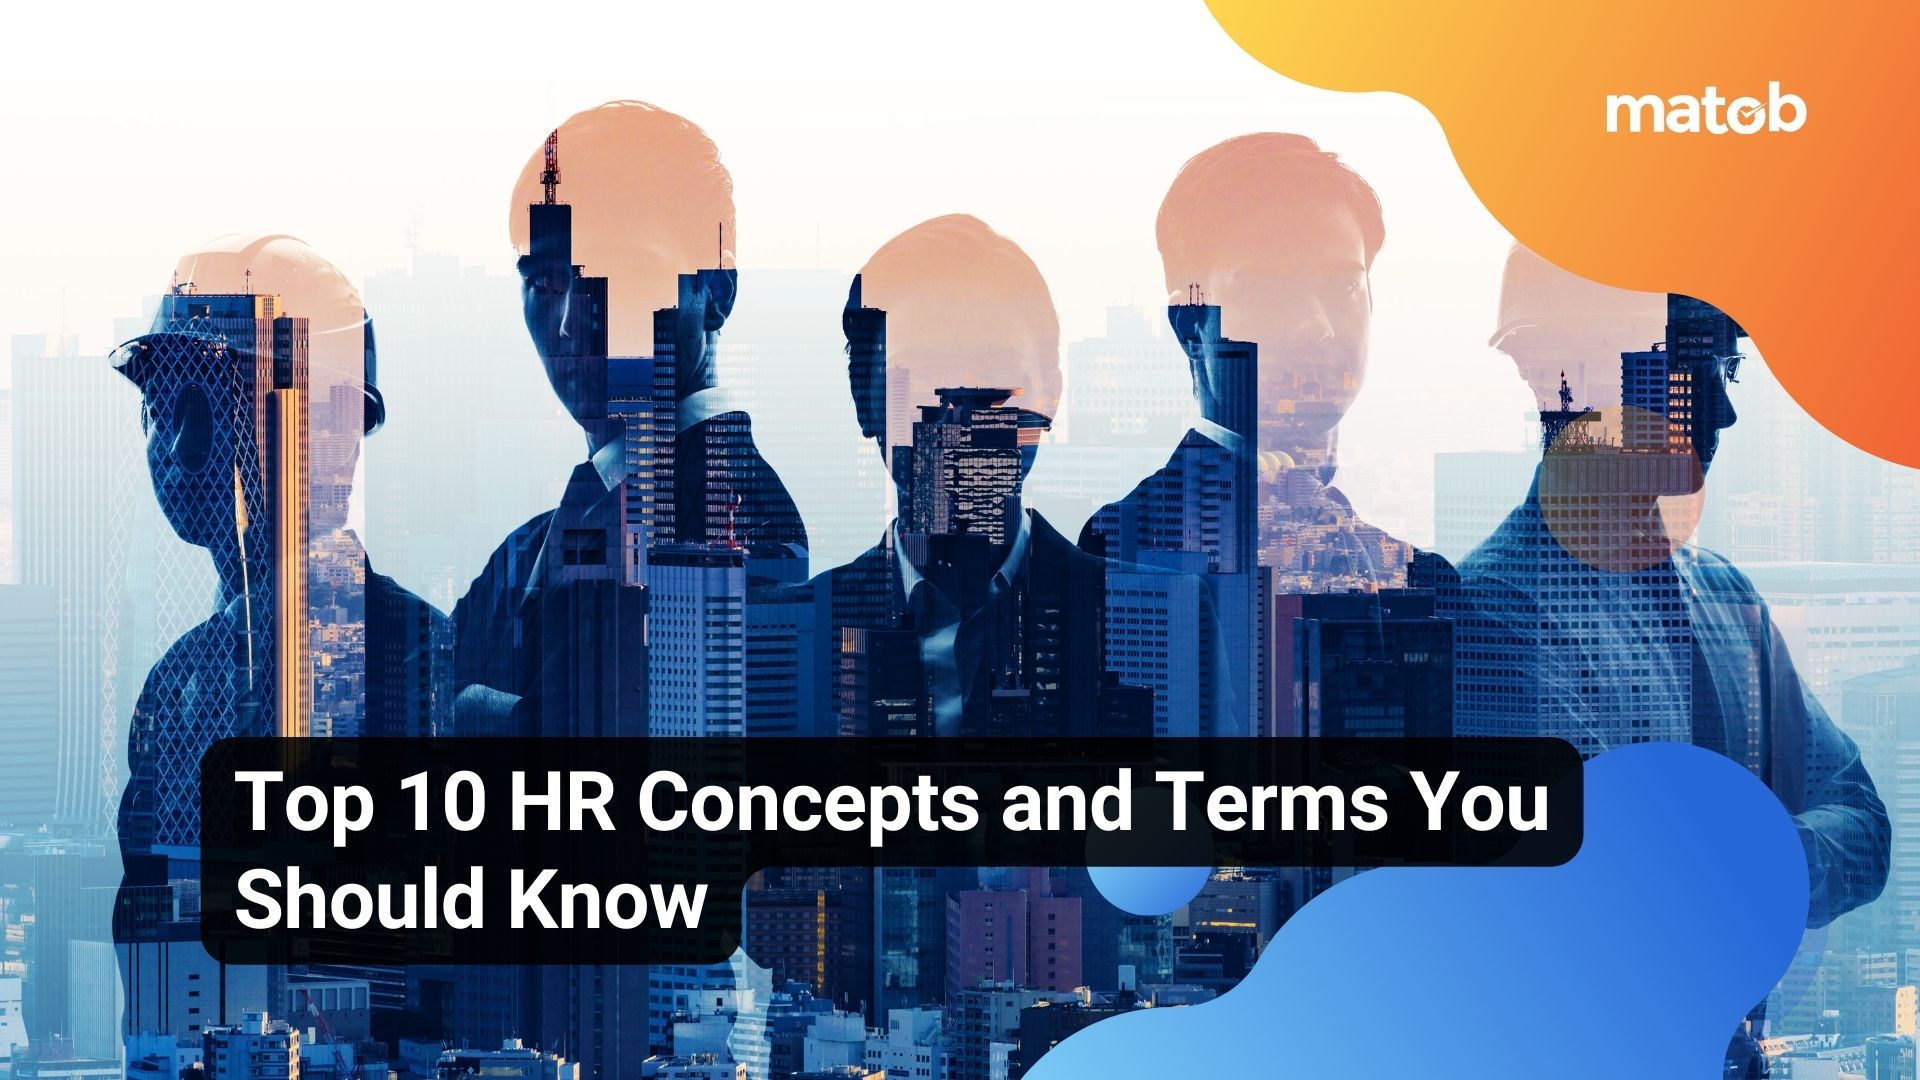 Top 10 HR Concepts and Terms You Should Know